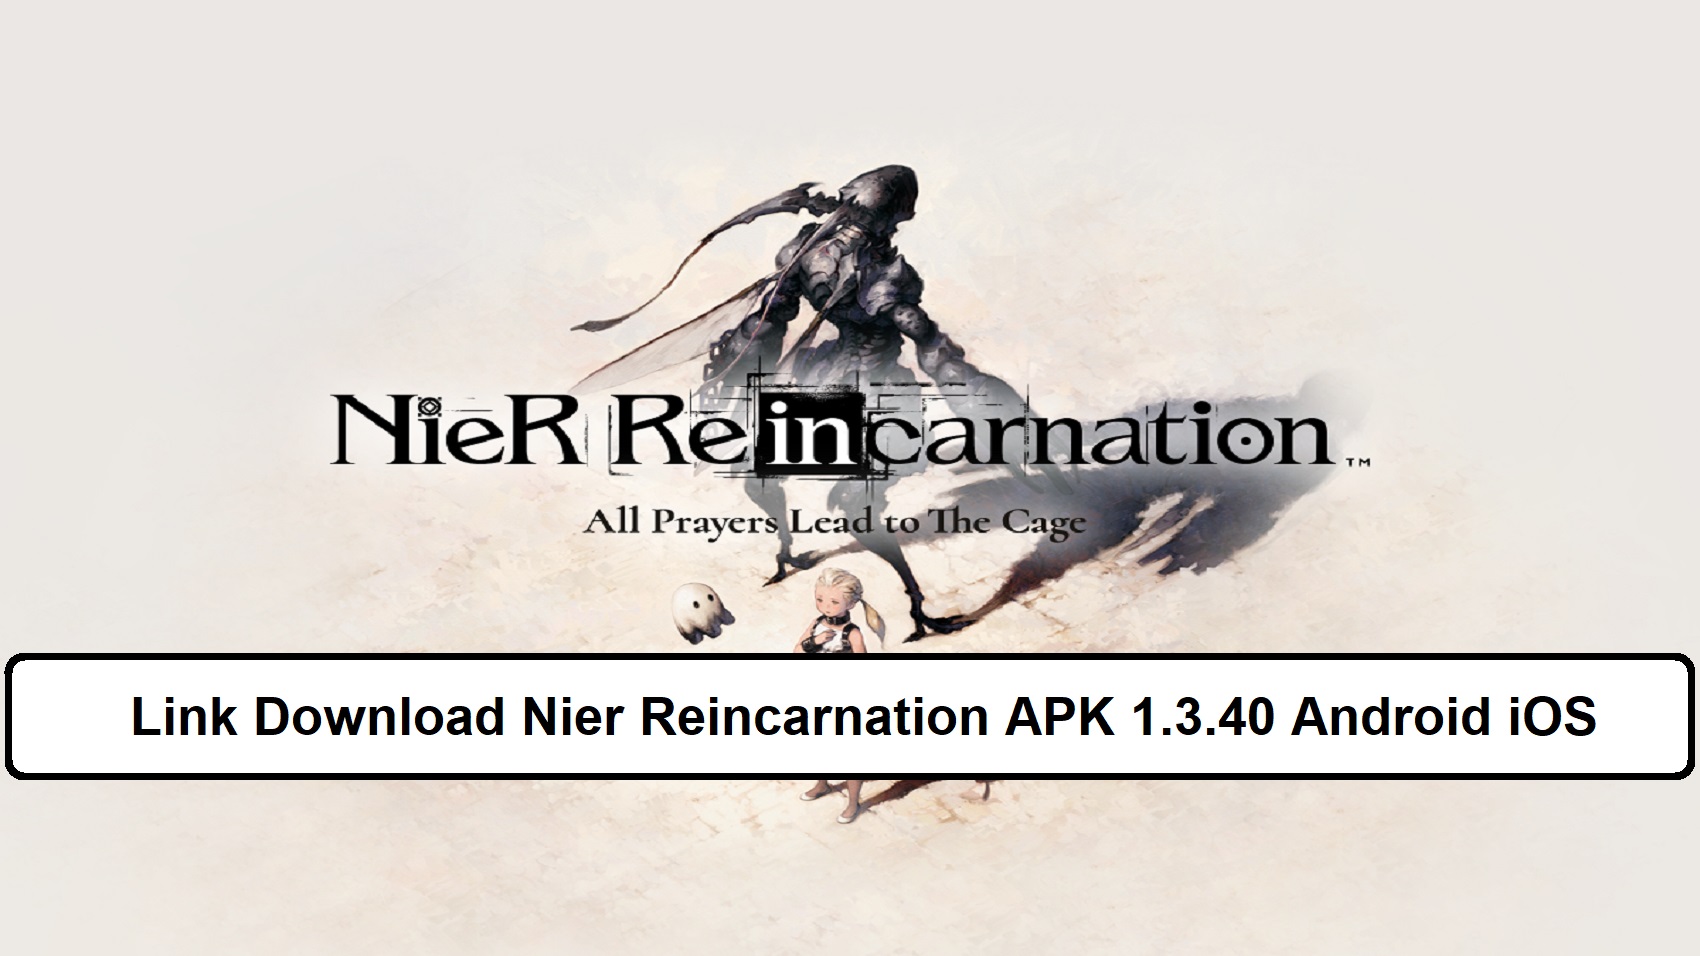 Link Download Nier Reincarnation APK 1.3.40 Android iOS